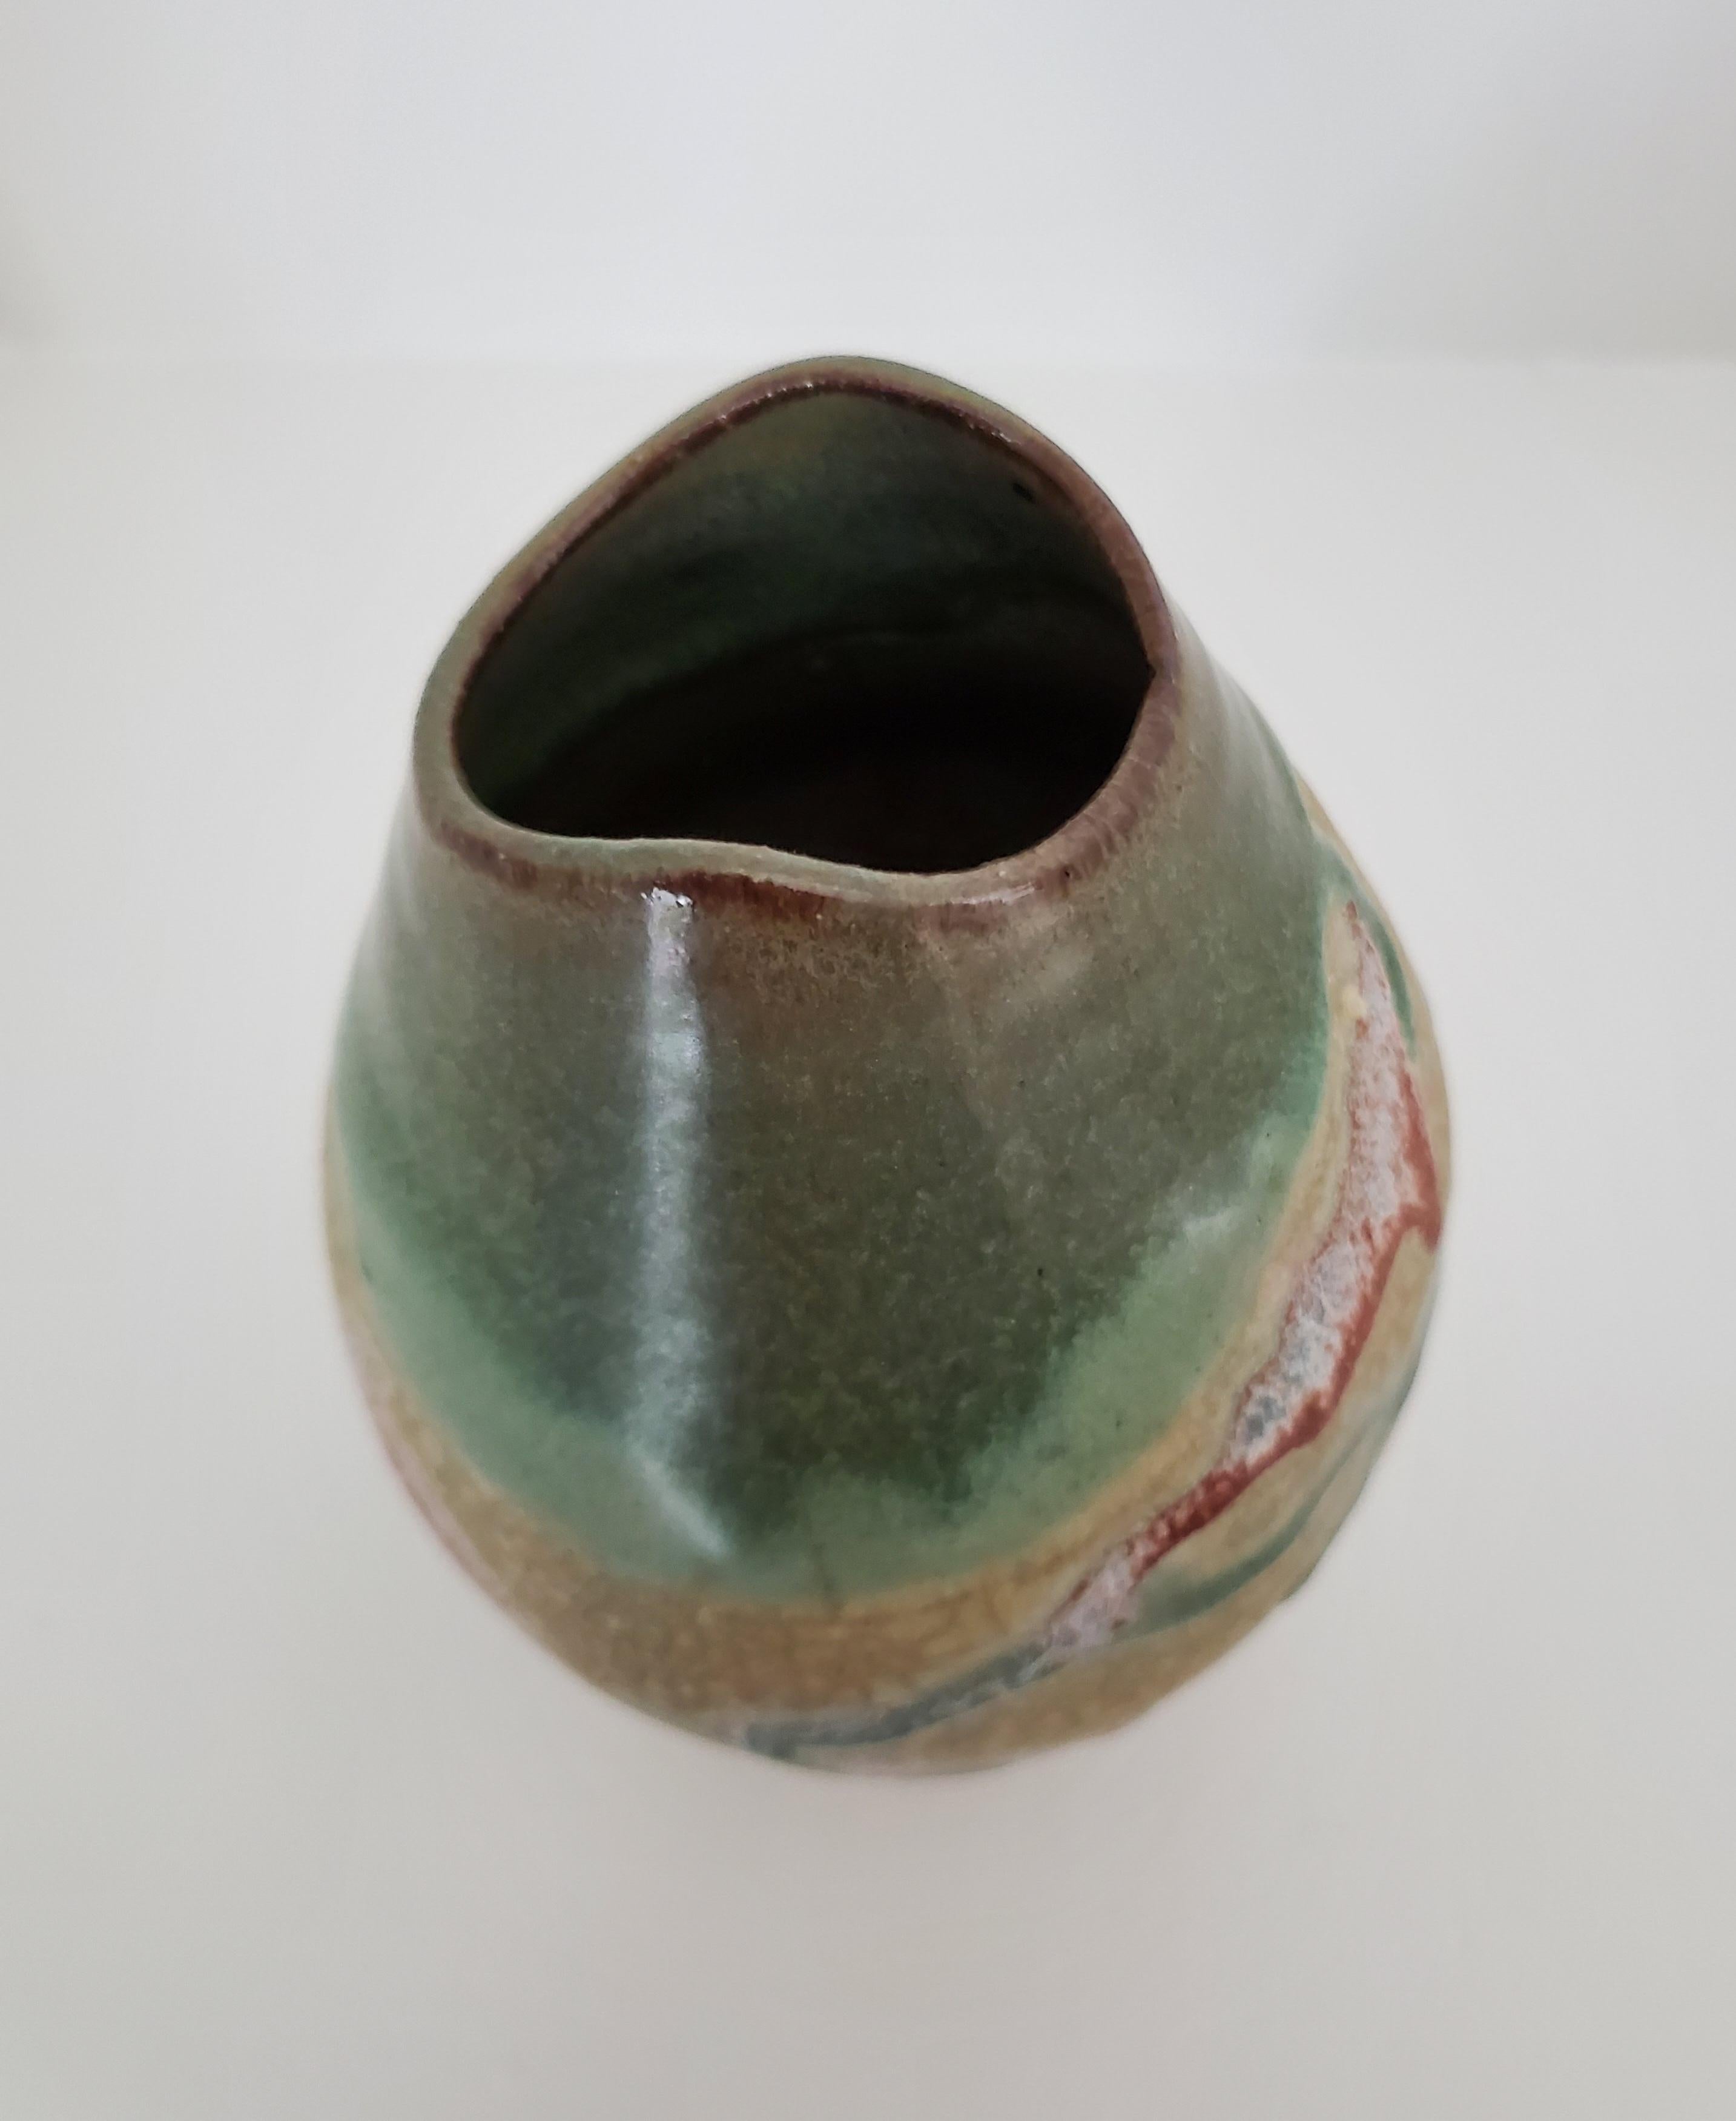 This vintage raku terracotta pottery vase is a delight to the eyes and a pleasure to handle. The unglazed taupe crackled background is rough to the feel and is embellished with smooth, raised glazed black, brick, brown, and aqua overlay. The mouth